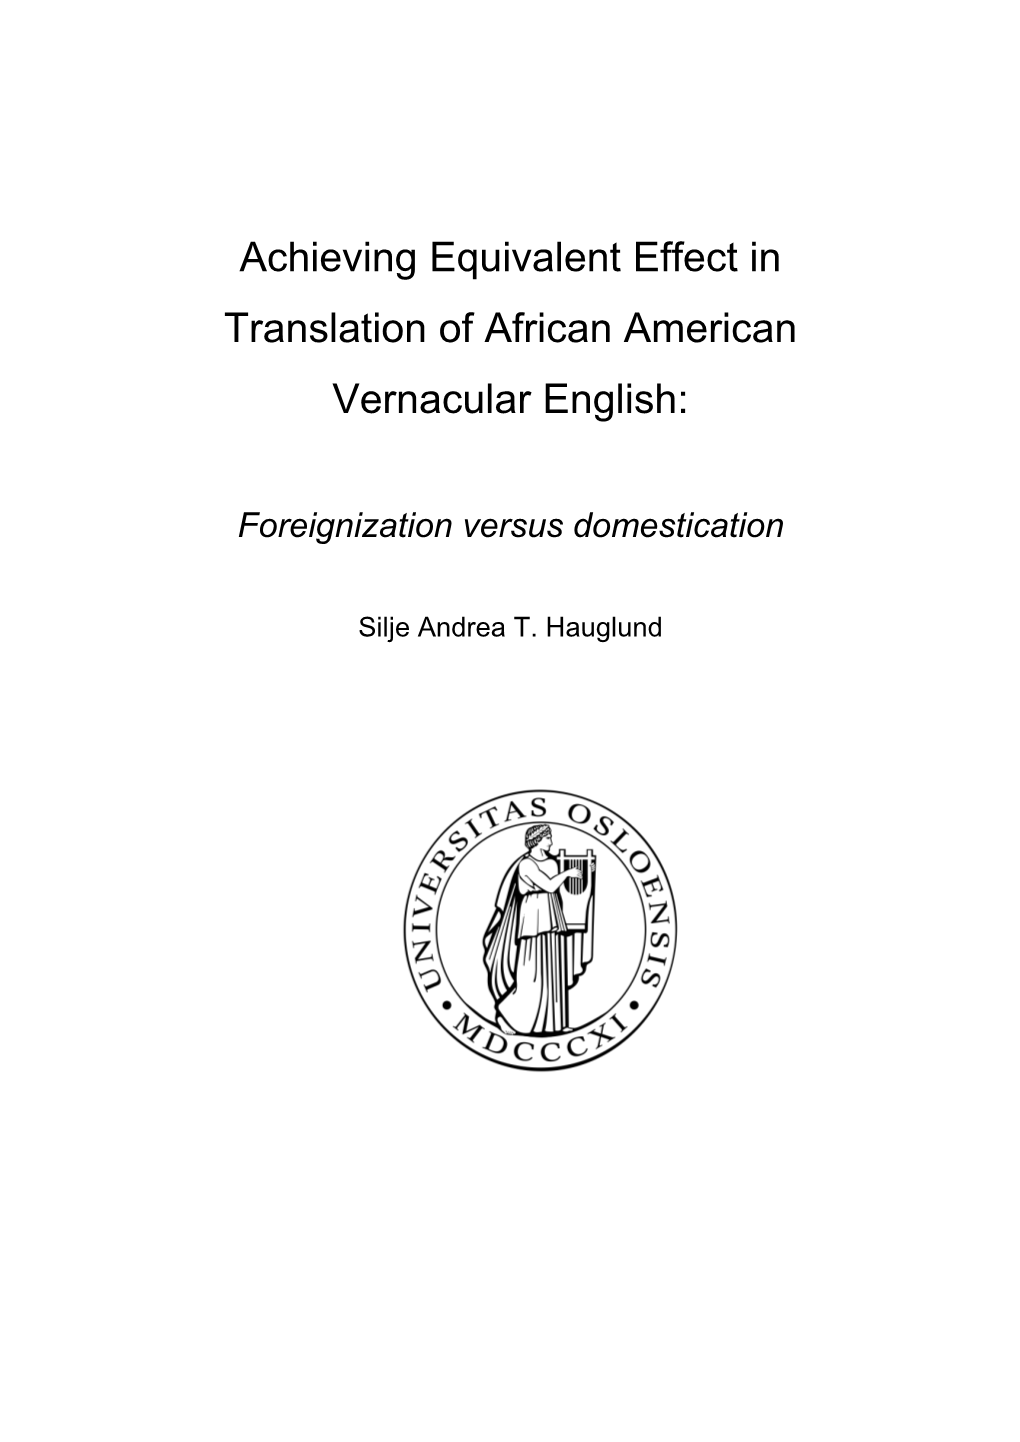 Achieving Equivalent Effect in Translation of African American